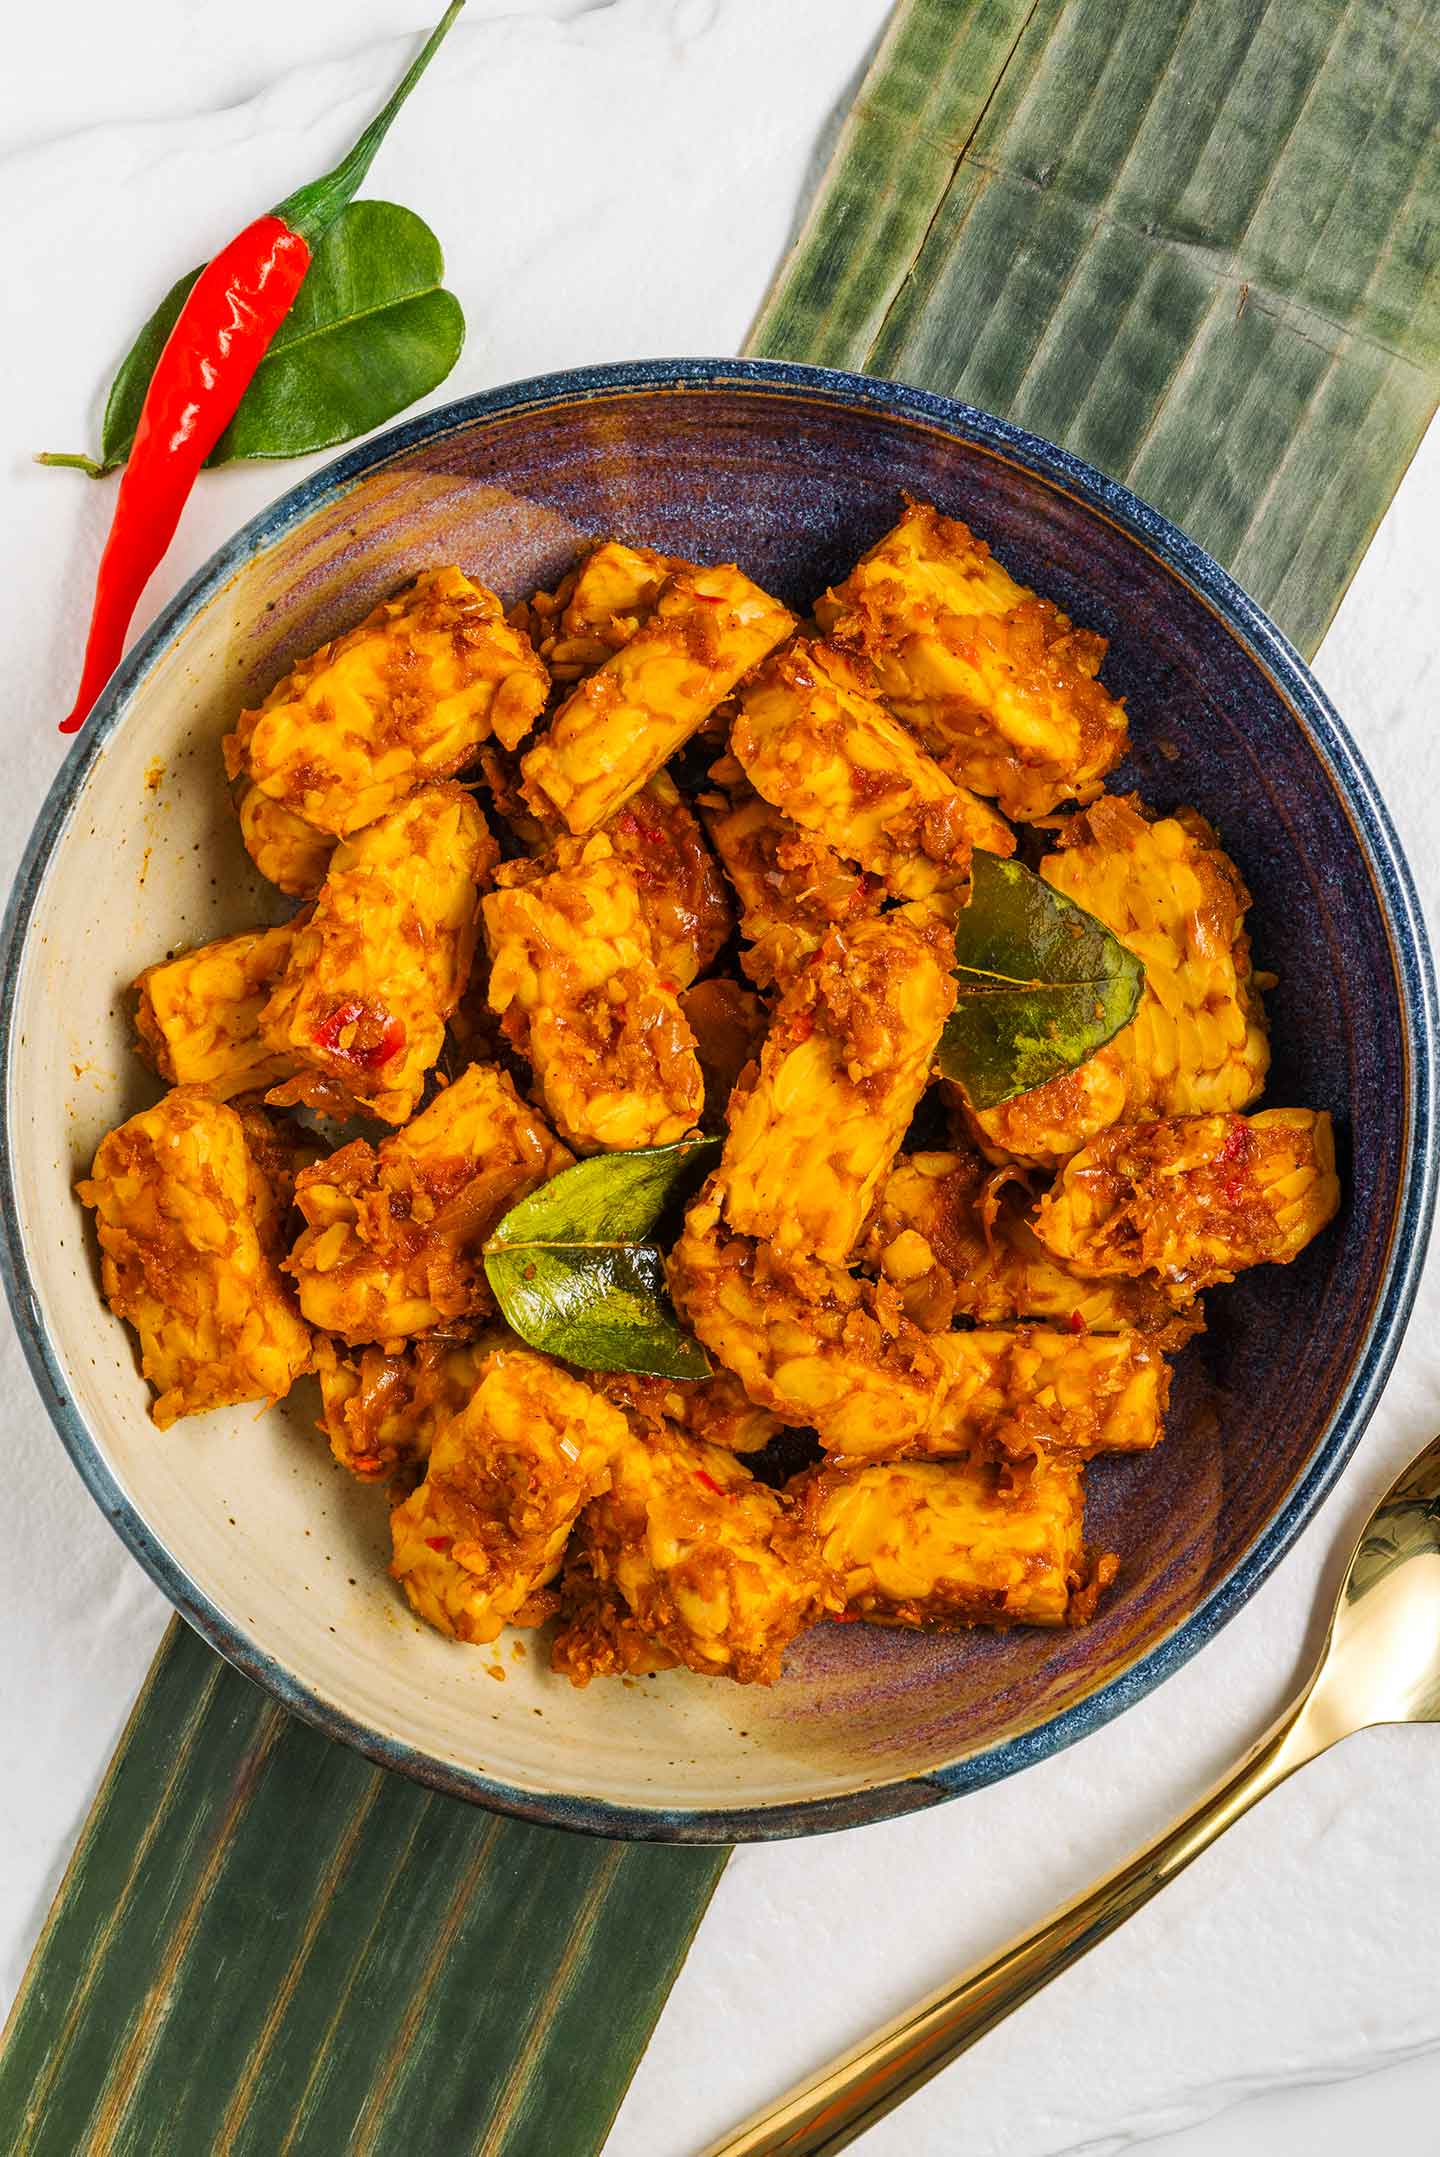 Vegan Balinese tempeh fills a shallow bowl. The tempeh is golden and spiced. Kaffir lime leaves garnish. A red chilli lays beside the bowl and a banana leaf lays underneath.